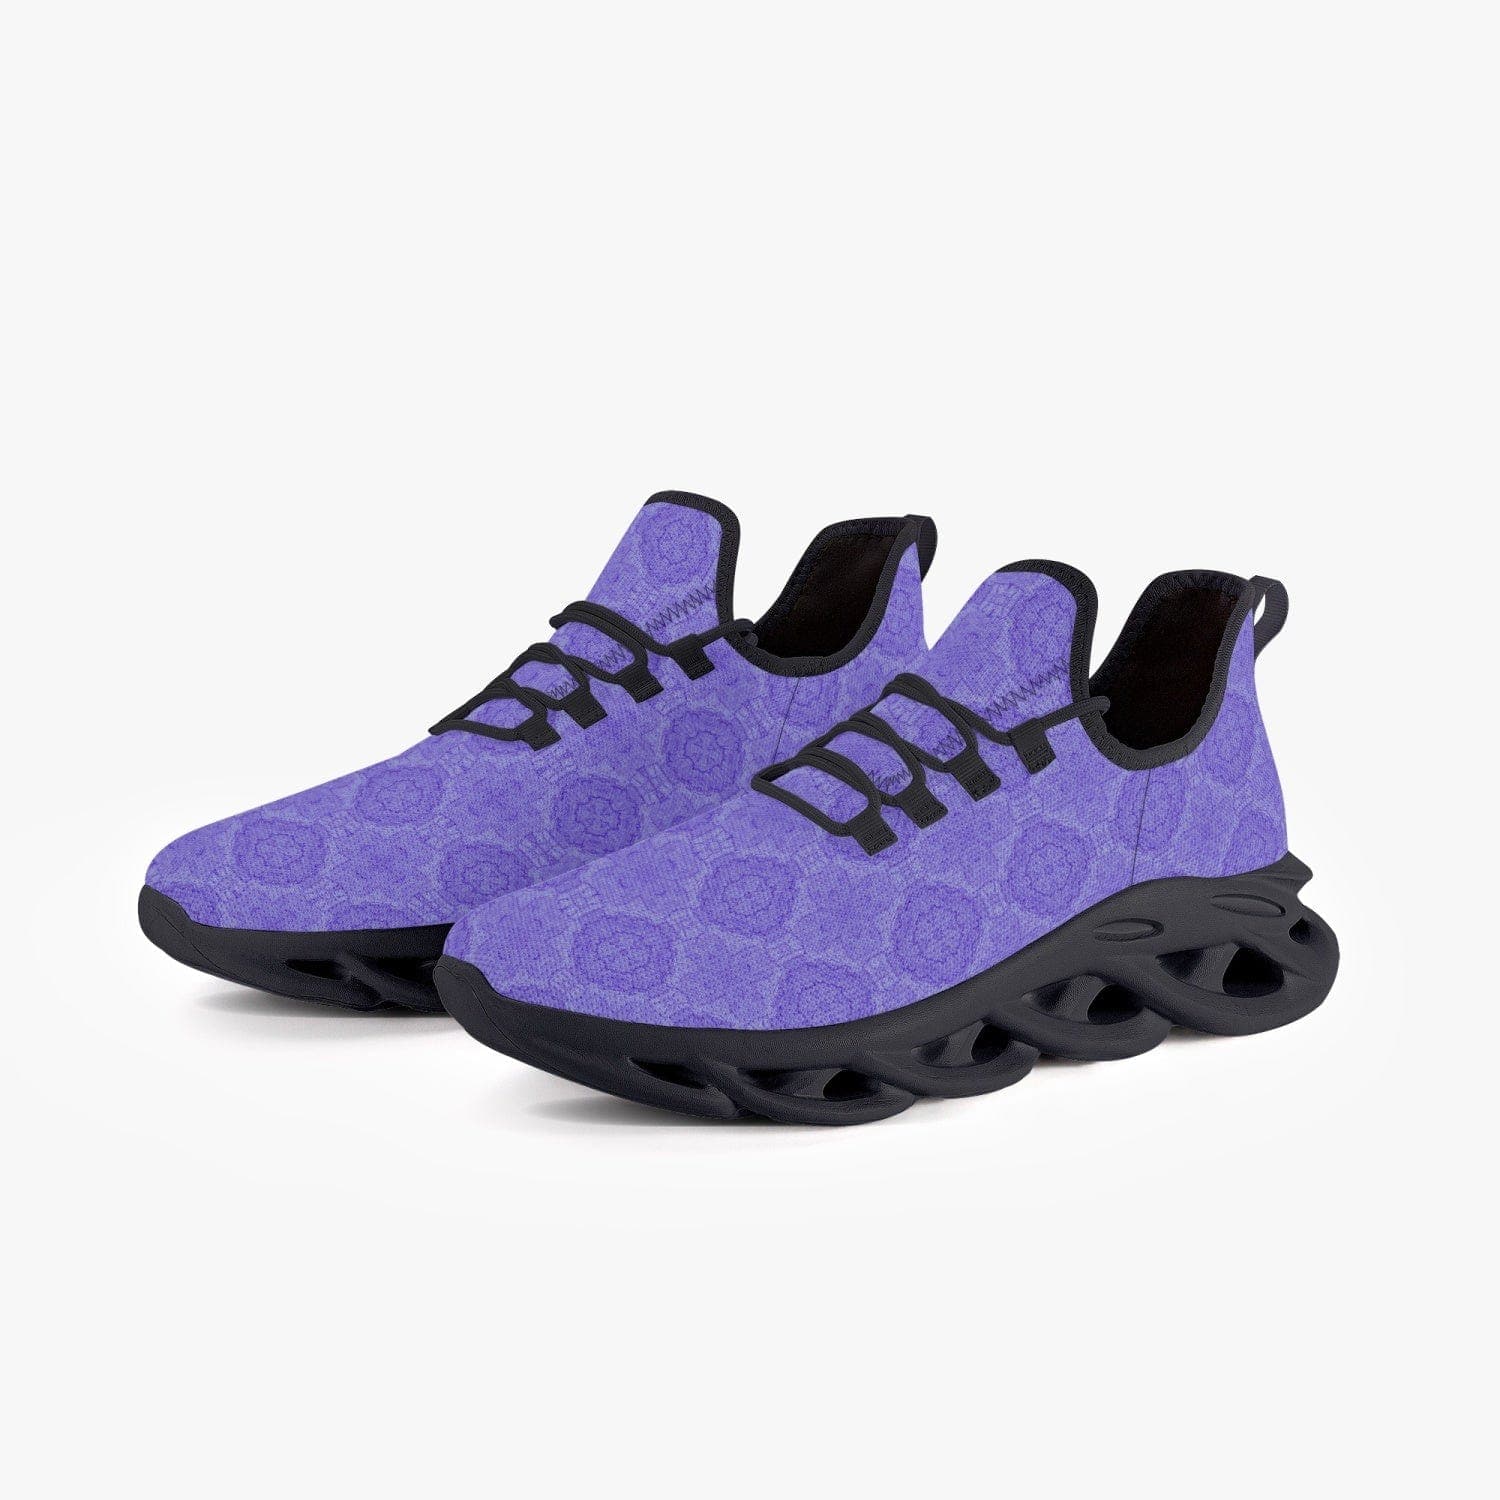 Purple Durable Springy Bounce Laced Mesh Soft Knit Sneakers for Men and Women with Soft Linen Interior